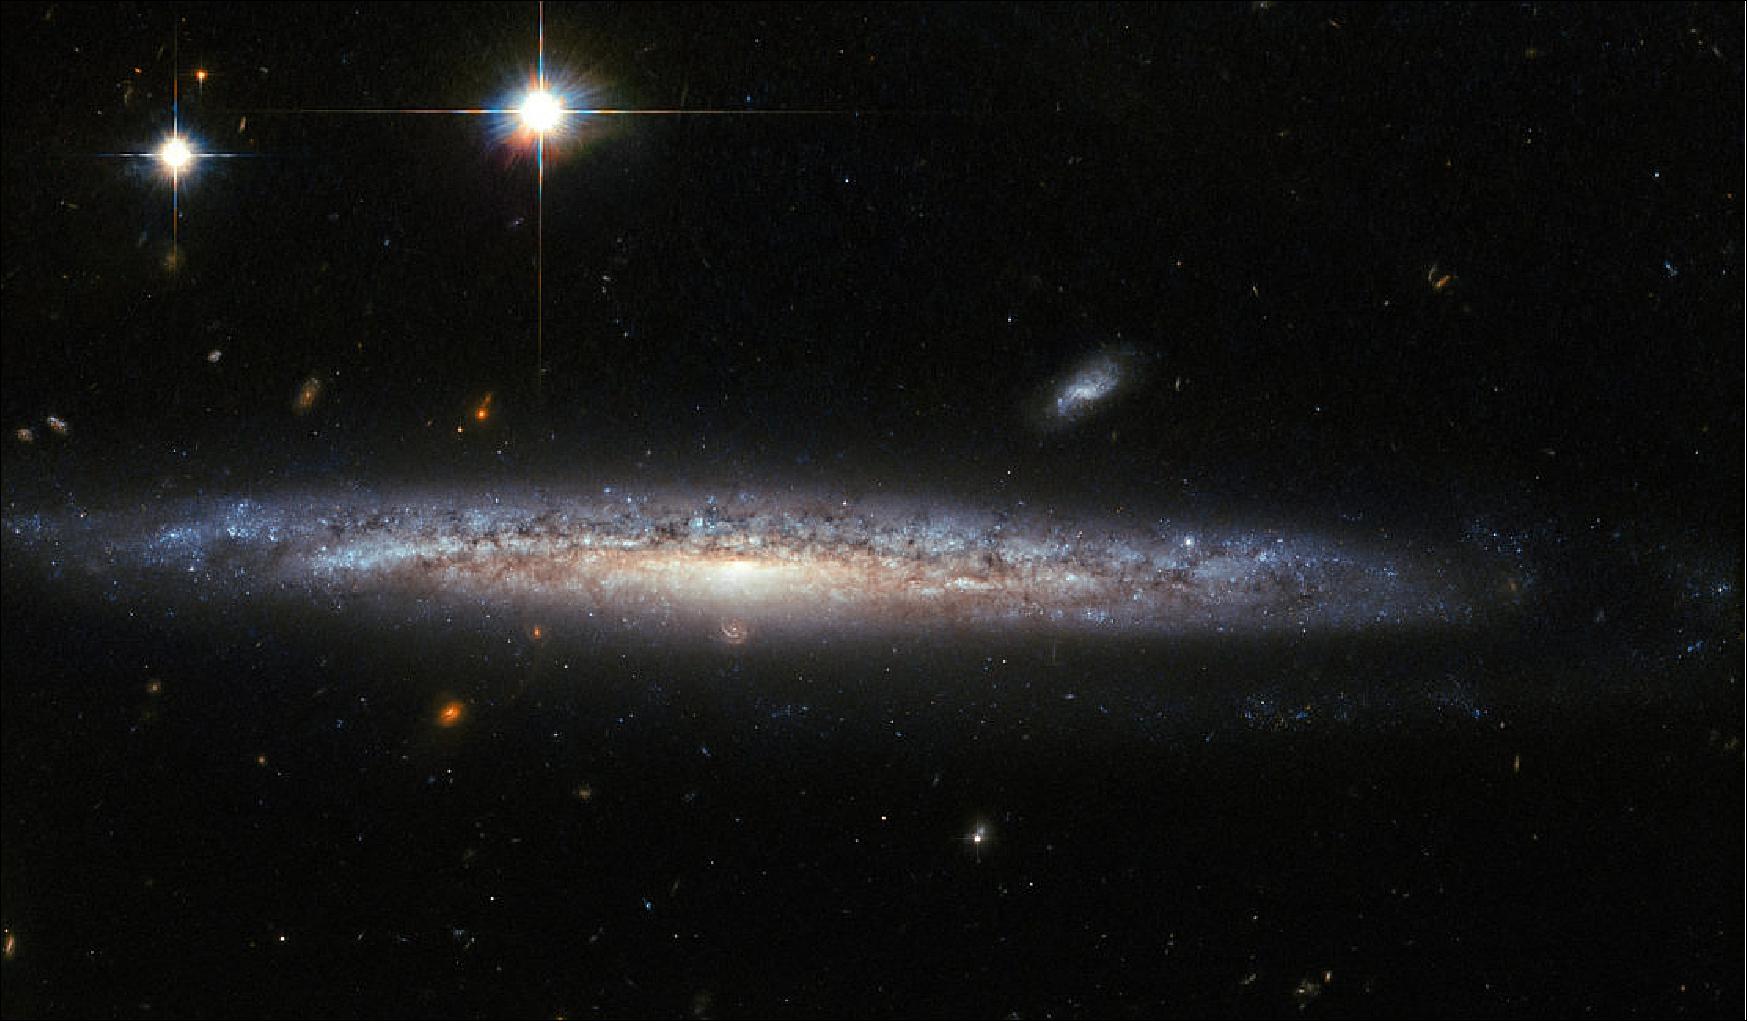 Figure 43: Image of the spiral galaxy NGC 5714, captured by the NASA/ESA Hubble Space Telescope (image credit: ESA/Hubble & NASA)